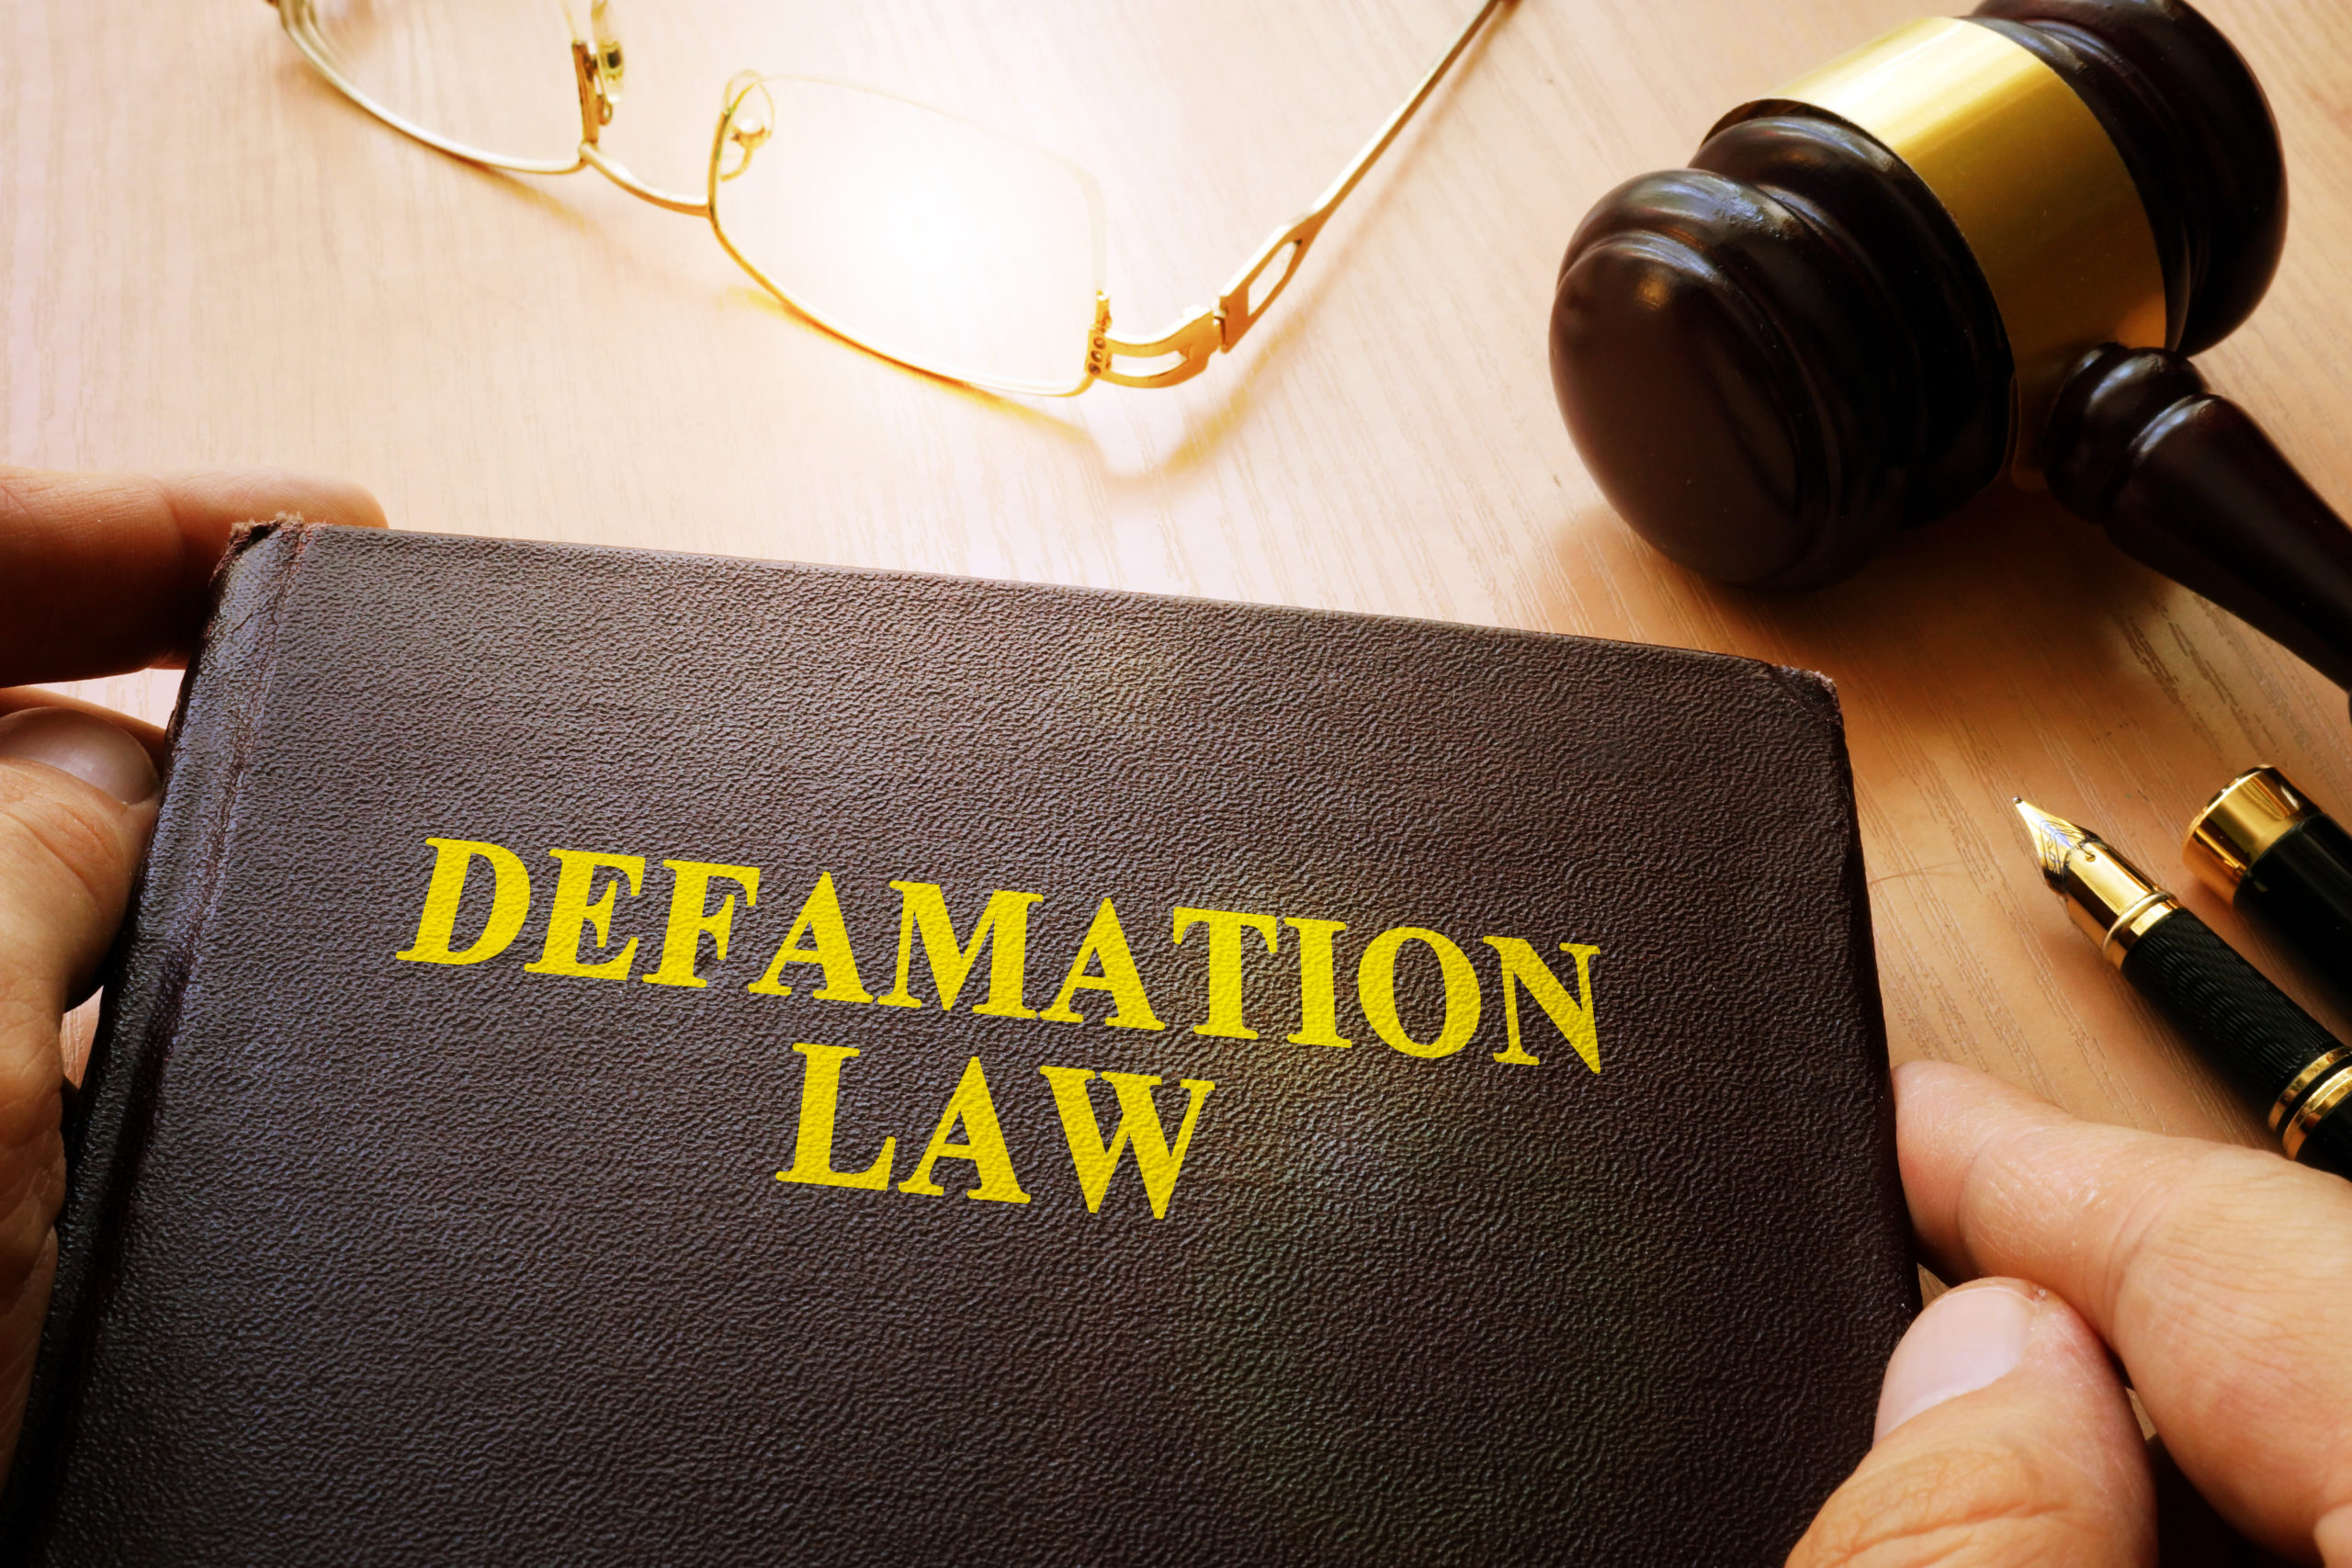 with case study explain defamation of character